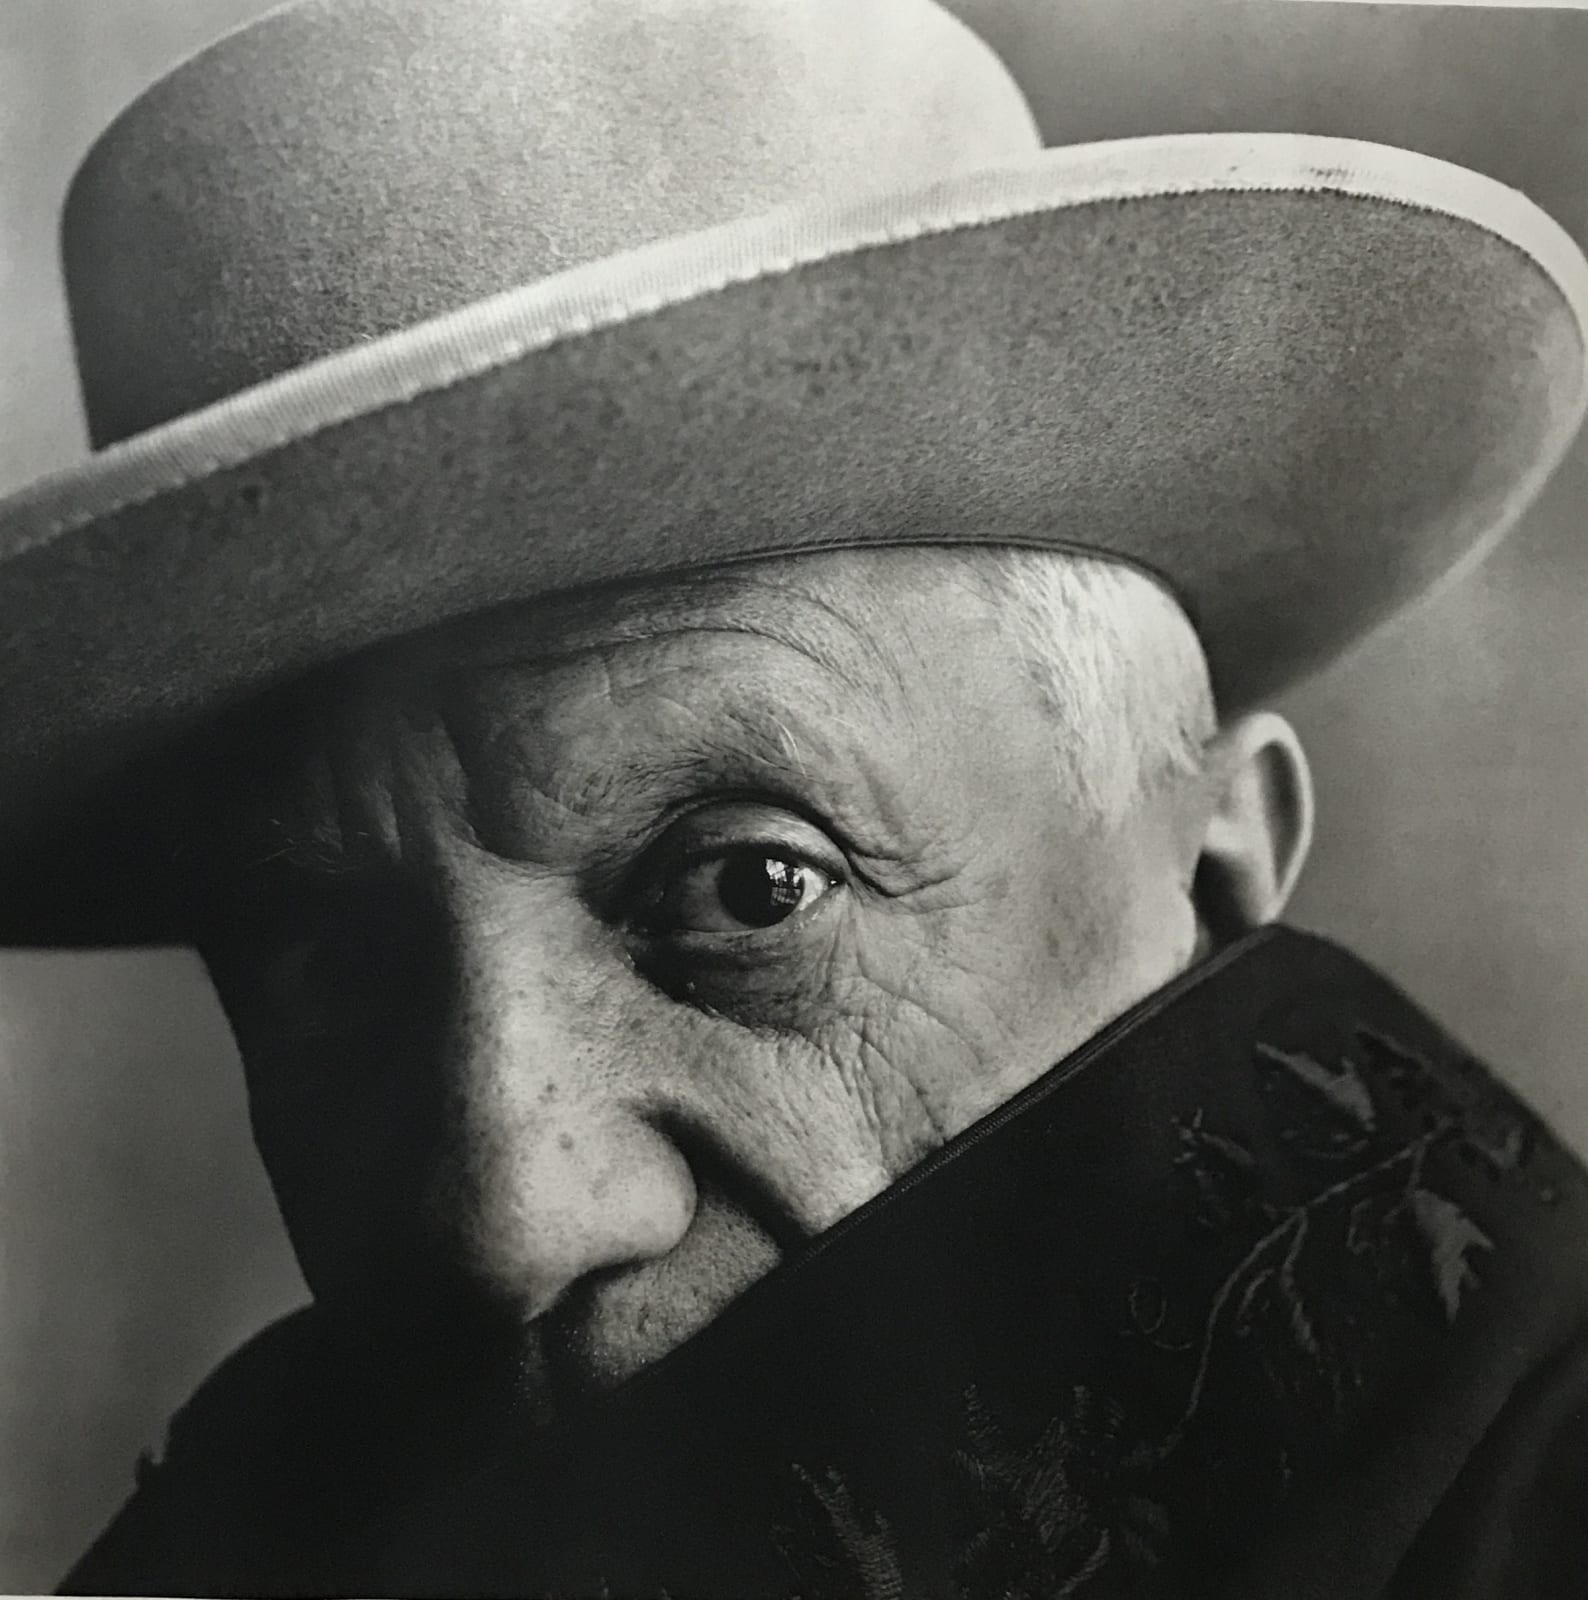 Irving Penn, Pablo Picasso (A), at Californie, Cannes, France, 1957